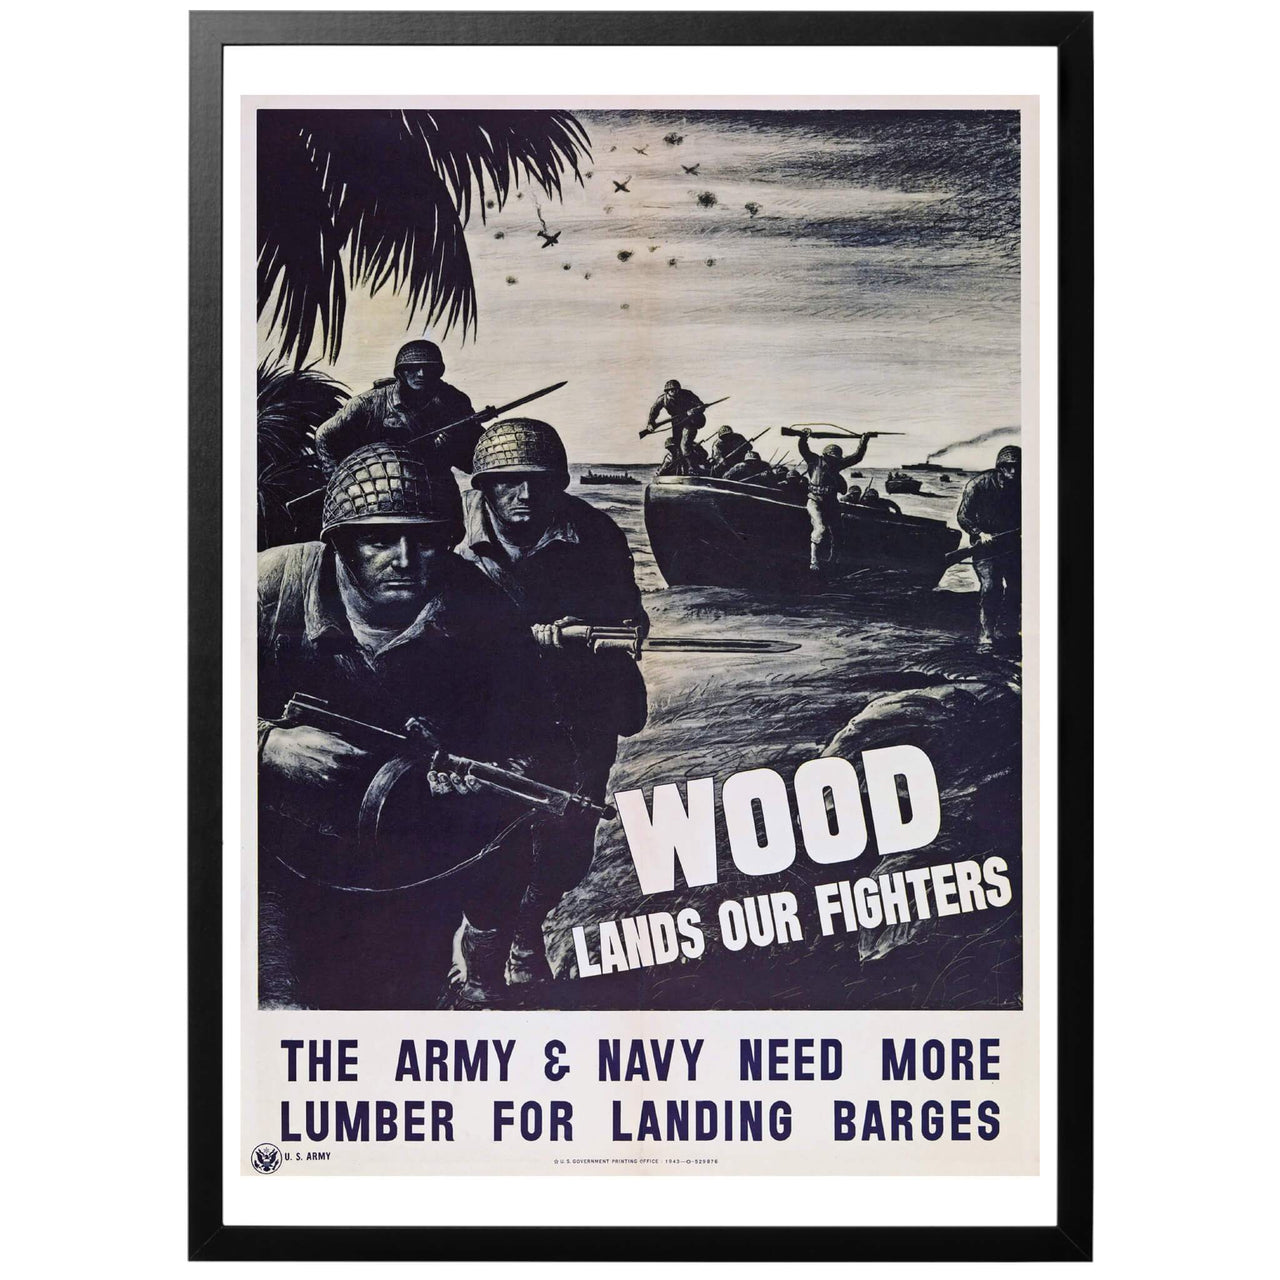 Wood lands our Fighters! Poster